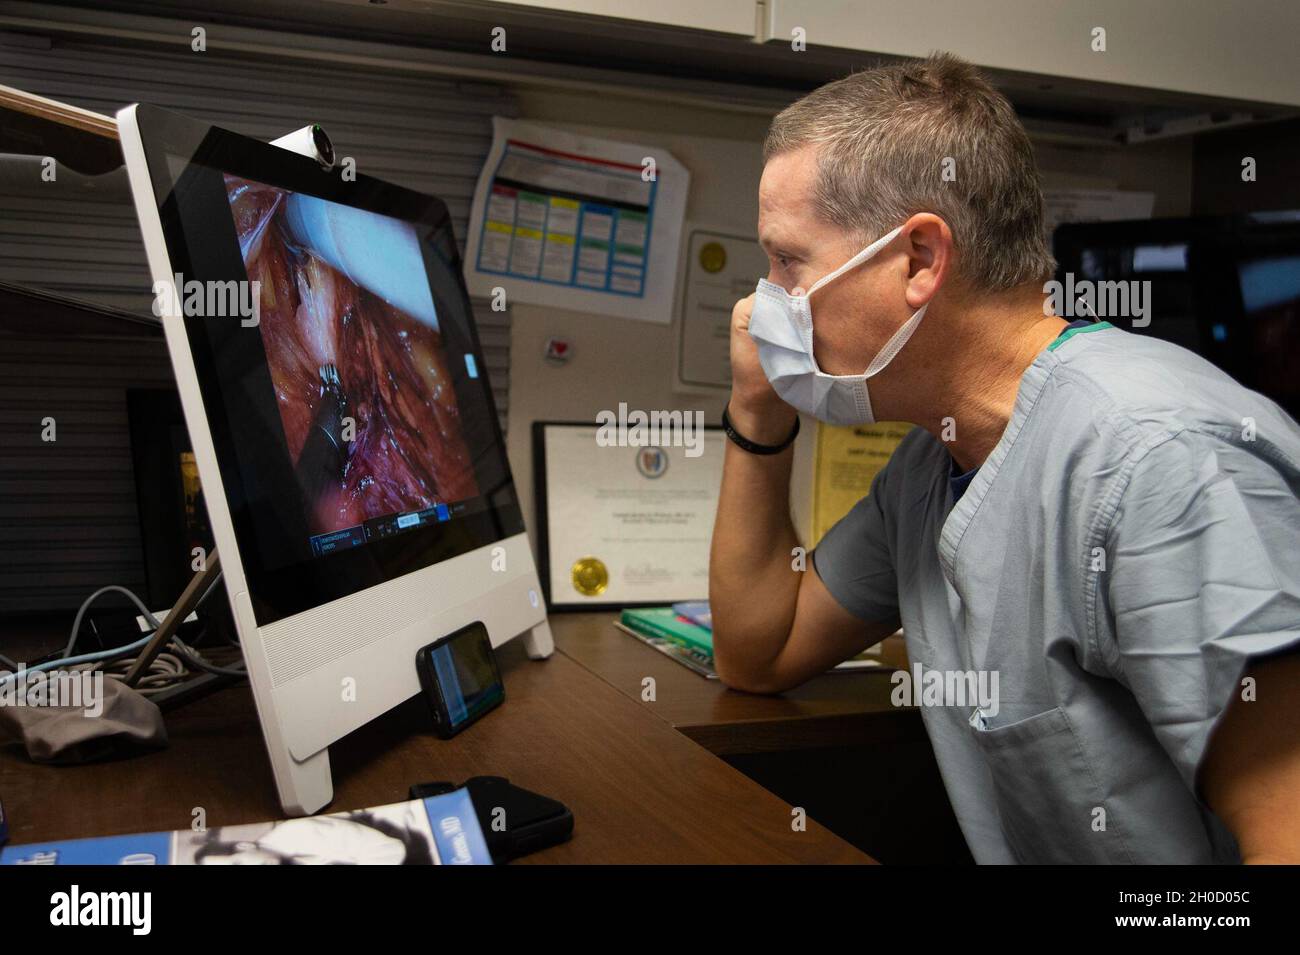 210127-N-LW757-1068  SAN DIEGO (Jan. 27, 2020) Capt. Gordon Wisbach, Naval Medical Center San Diego’s (NMCSD) Bio-skills Training and Simulation Center’s surgical director, mentors a surgical team from a remote office during a robotic-assisted laparoscopic inguinal hernia repair procedure Jan. 27. Robotic surgical systems, like those used at NMCSD, allow surgeons to perform minimally-invasive procedures, and this procedure was performed during a remote, tele-mentoring study. NMCSD’s mission is to prepare service members to deploy in support of operational forces, deliver high quality healthcar Stock Photo